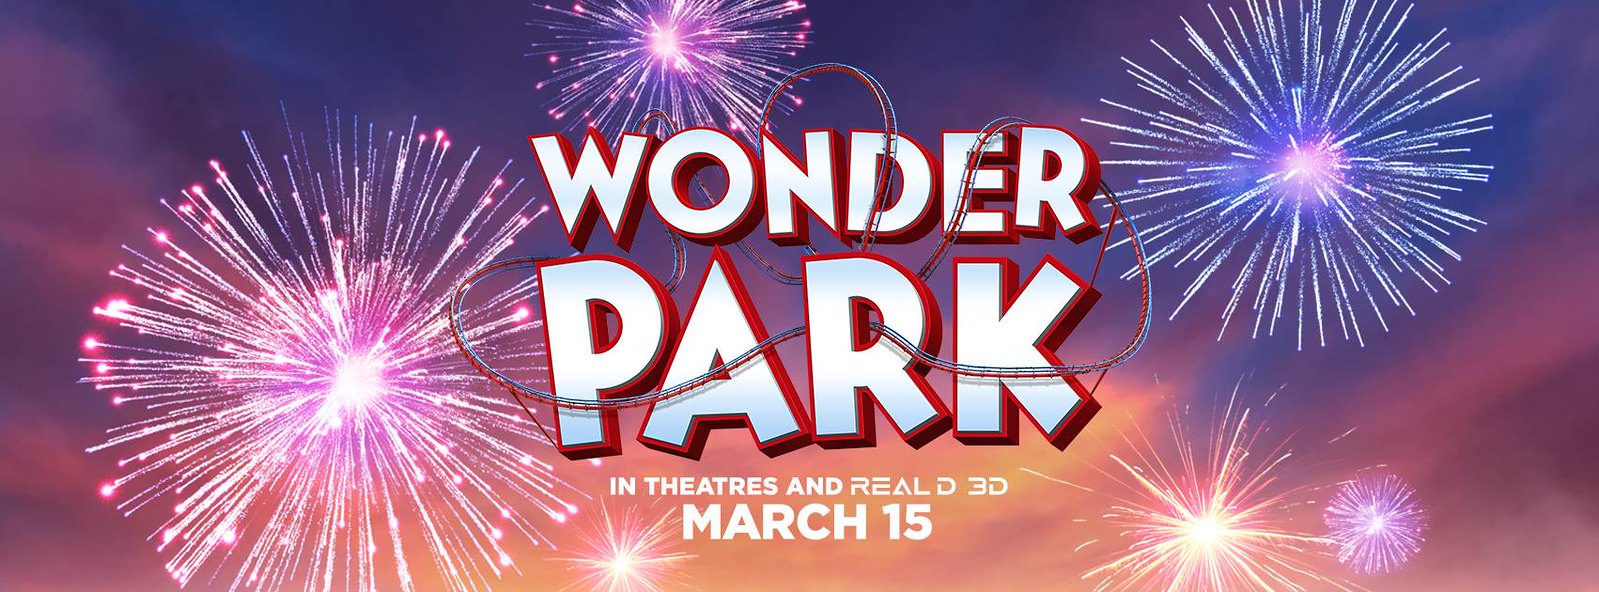 Wonder Park Is Coming To Theaters March 15! #ad @WonderPark #rwm #WonderPark